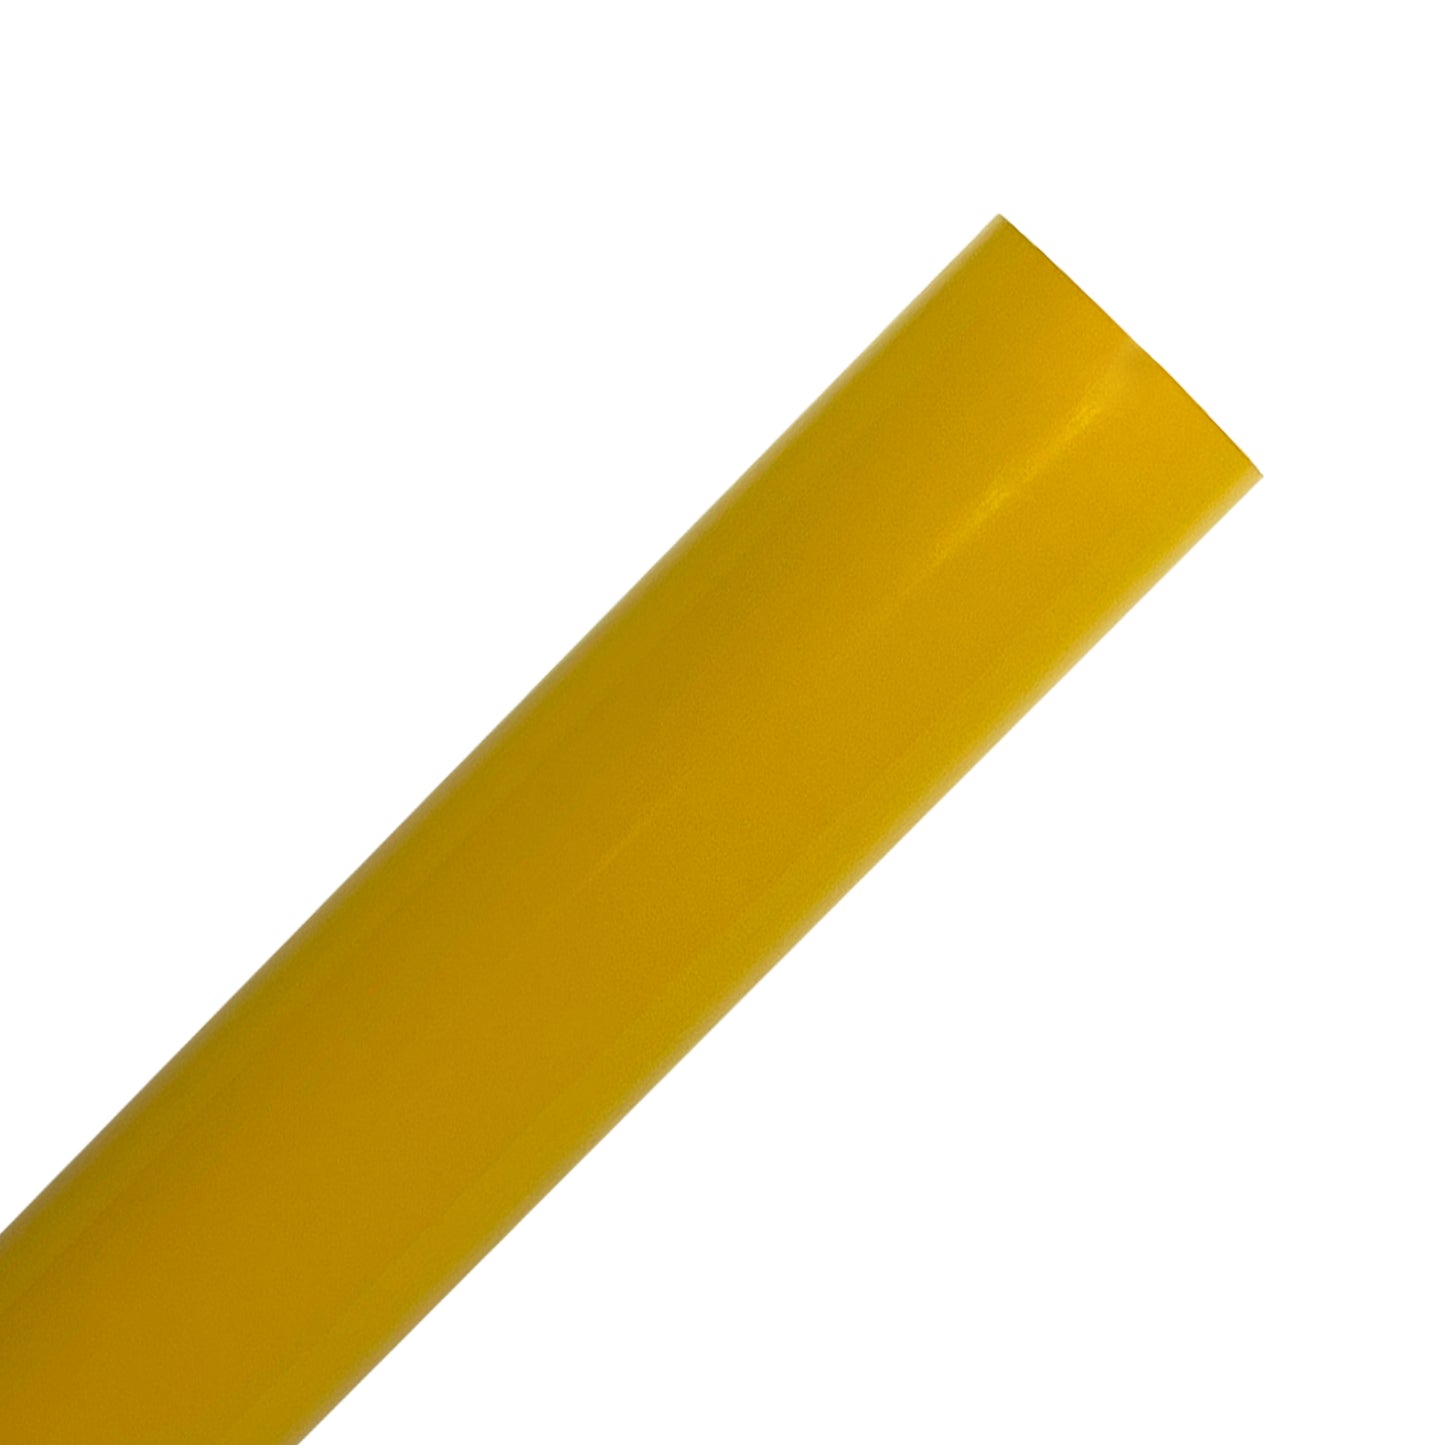 Yellow Adhesive Vinyl Rolls By Craftables